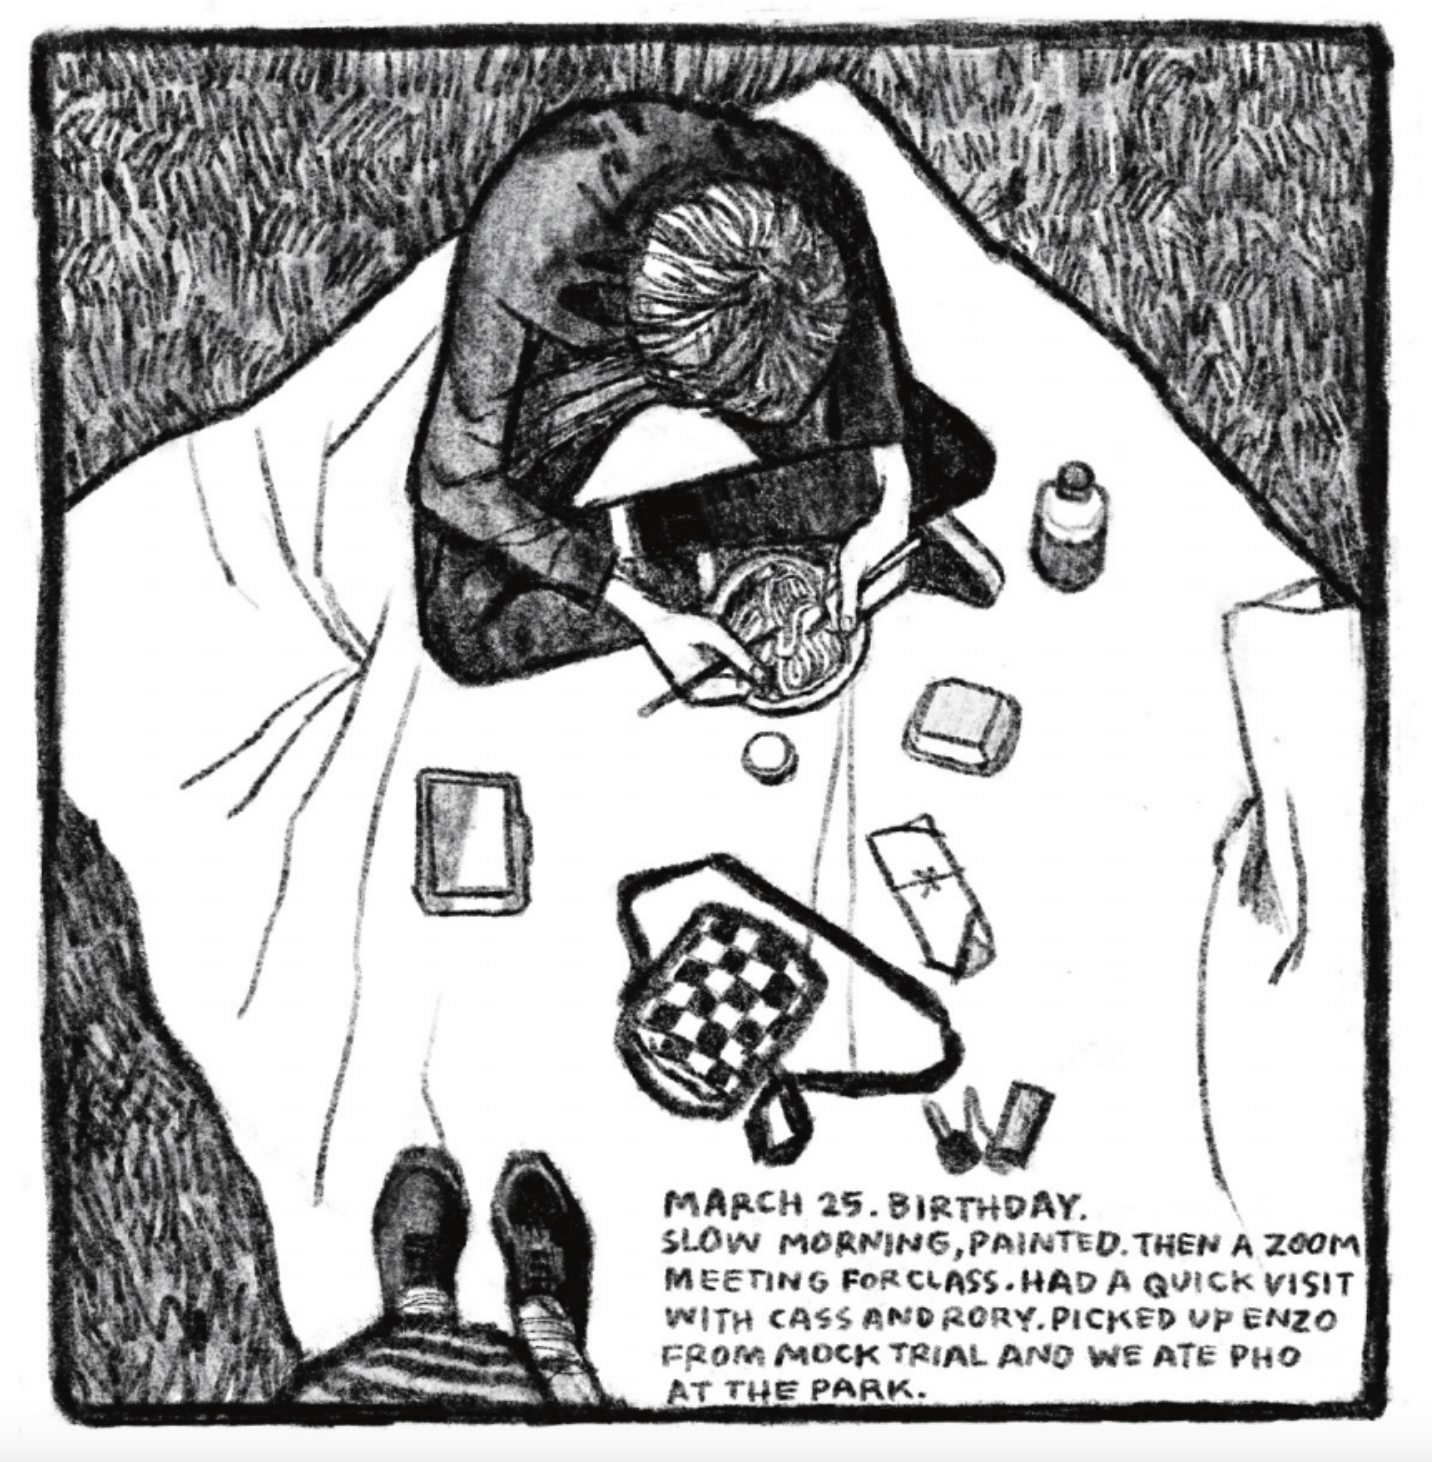 A picnic scene viewed from above: The top of Enzo's head is visible as he sits and eat pho on a blanket. Kim's shoes are seen at the bottom. Various objects are laid out on the blanket, included a purse and a takeout container. 

Description reads: "March 25. Birthday. Slow morning, painted. Then a zoom meeting for class. Had a quick visit with Case and Rory. Picked up Enzo from mock trial and we ate pho at the park."